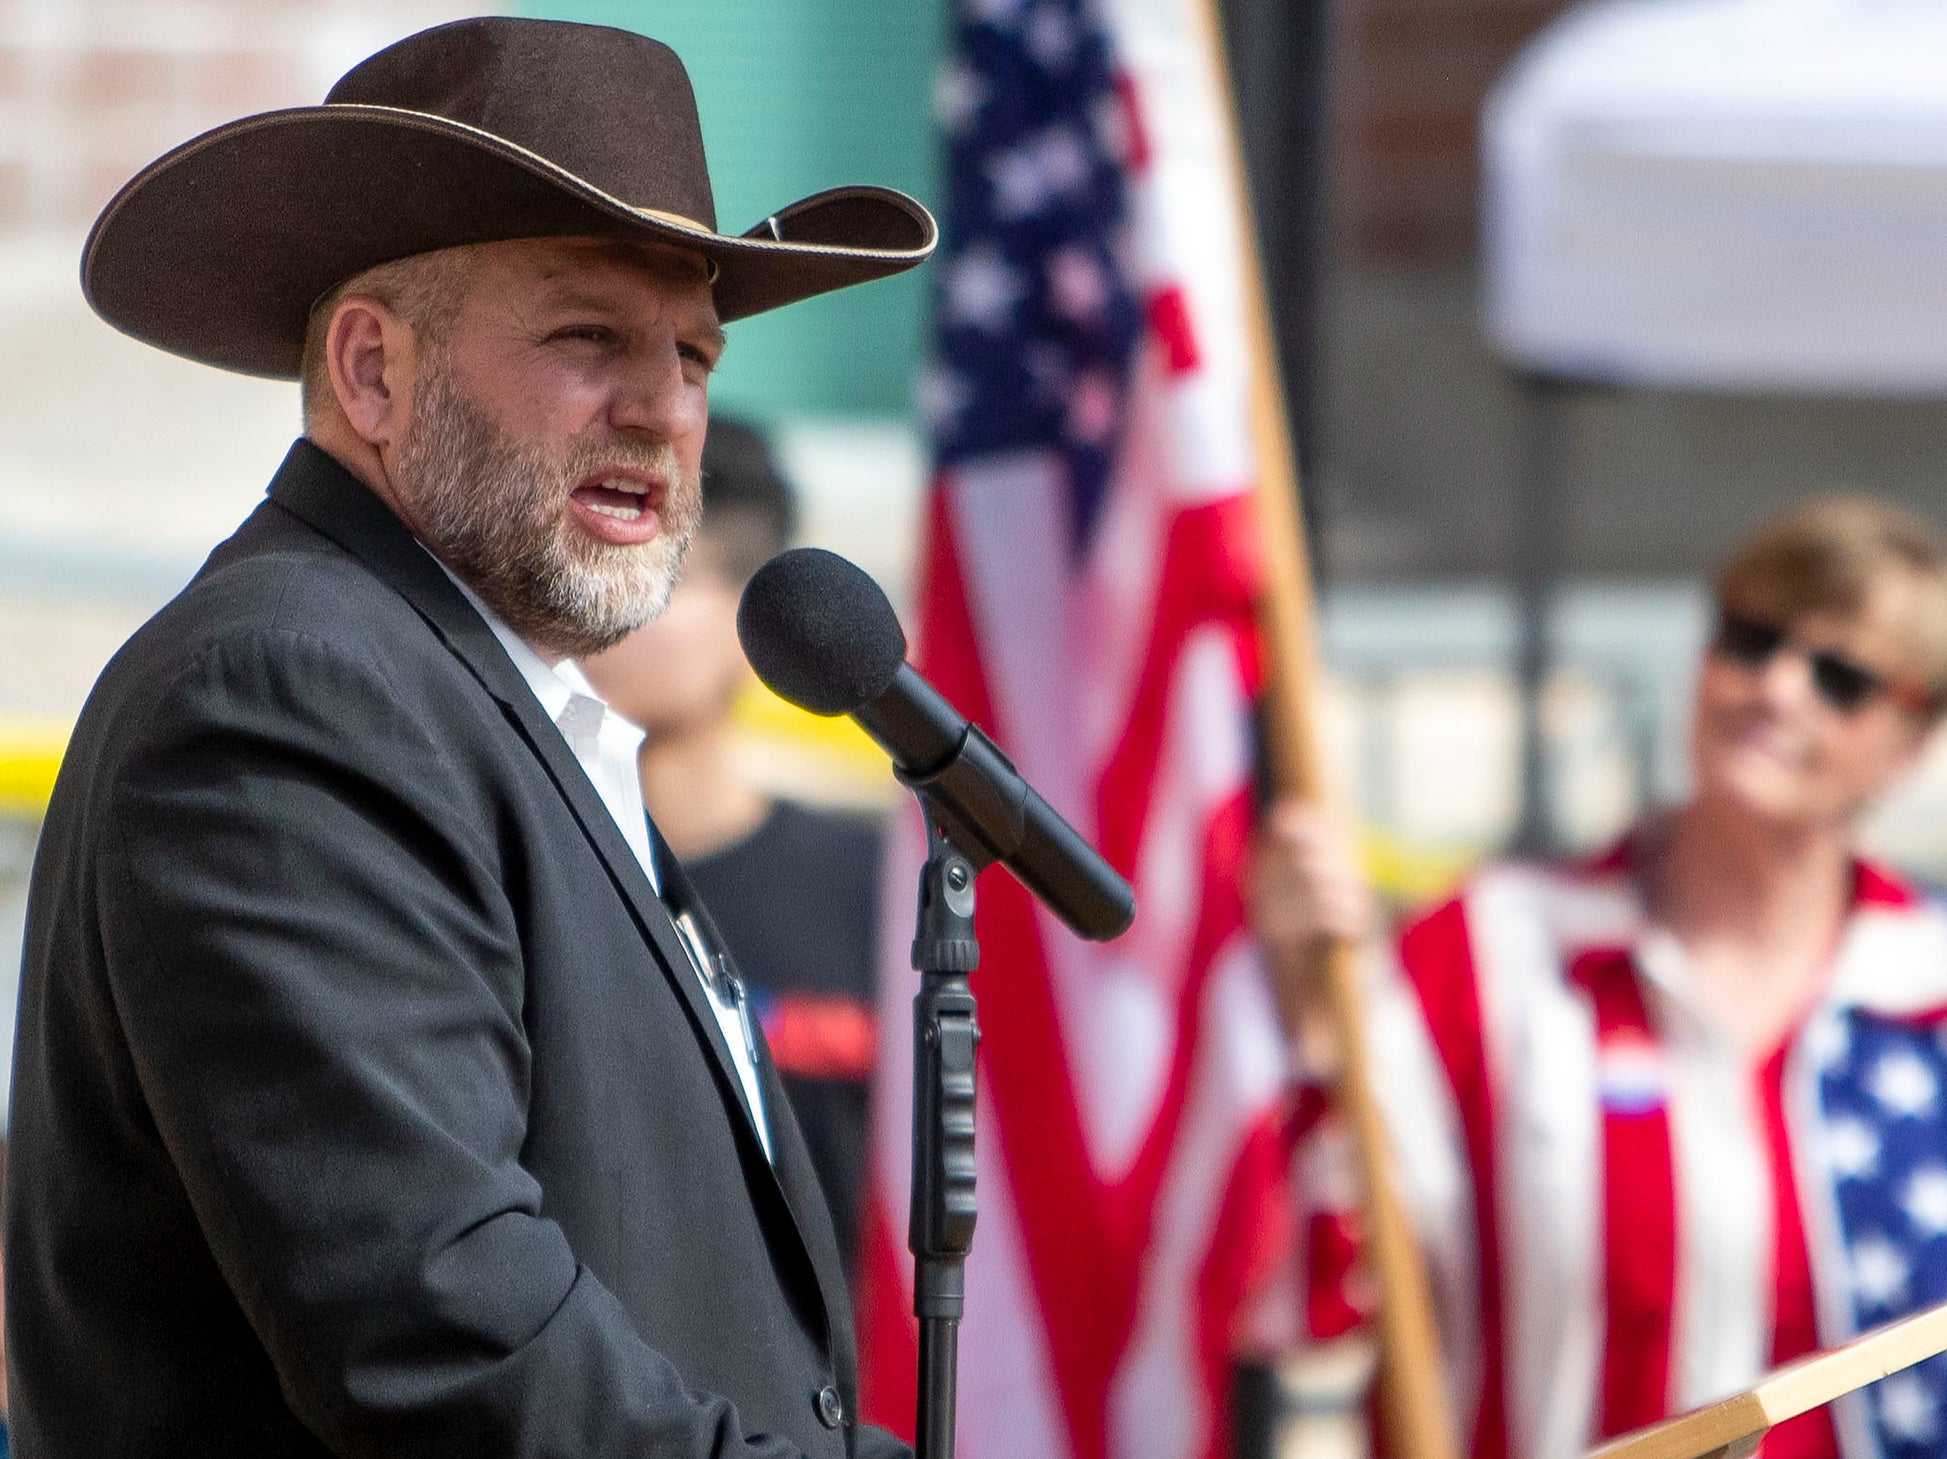 Ammon Bundy, who is running for governor in Idaho, was arrested on suspicion of misdemeanor trespassing at St Luke’s Meridian Medical Centre in Meridian, west of Boise, on Saturday